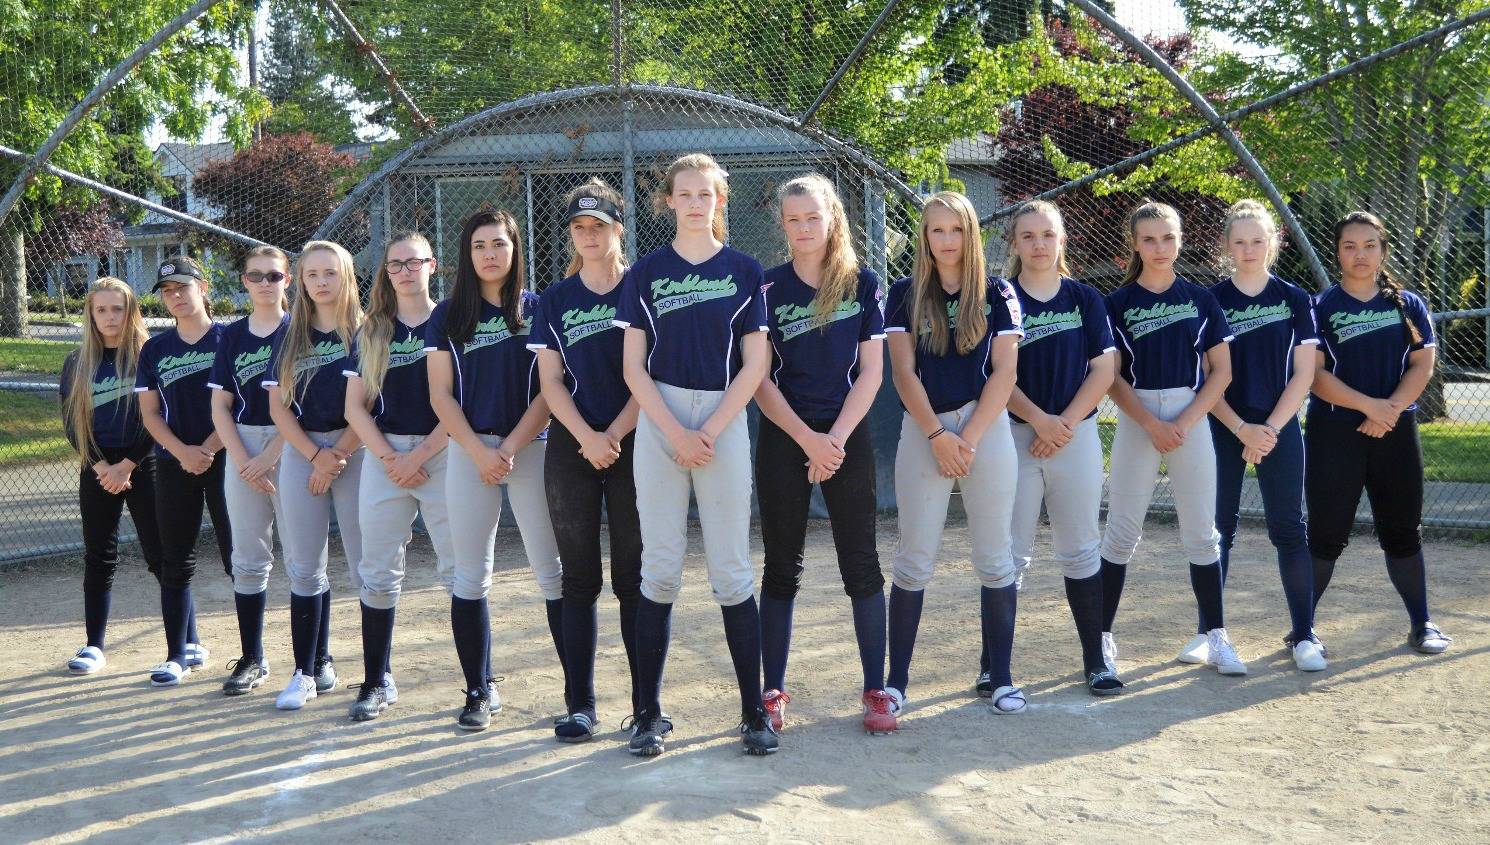 Kirkland’s District 9 champion squad that will compete in the Junior Softball World Series. Left to right: Haley Brown, Maddy Miller, Ashley Allen, Claire Towey, Mackenzie Burke, Amy Chen, Anna Fridell, Antonia Norman, Kaci Gordon, Kaia Bradford, Lilly Bean, Ruby Olmstead, Abbie Reynolds and Maliena Carelli. Courtesy photo